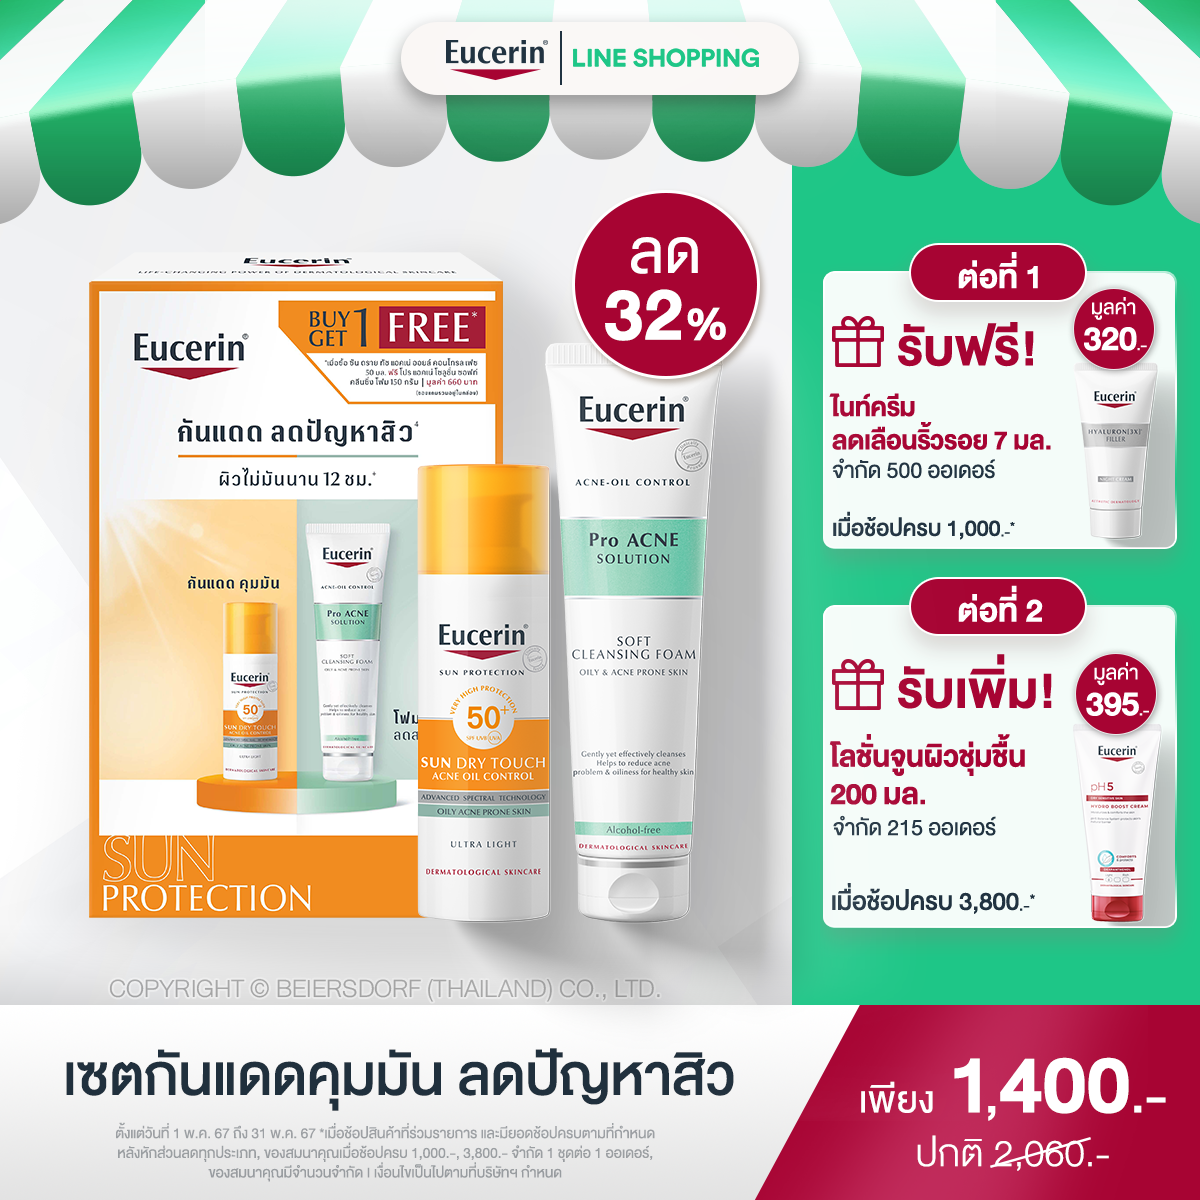 Eucerin SUN DRY TOUCH ACNE OIL CONTROL 50 ML FREE Pro ACNE SOLUTION SOFT CLEANSING FOAM 150 G